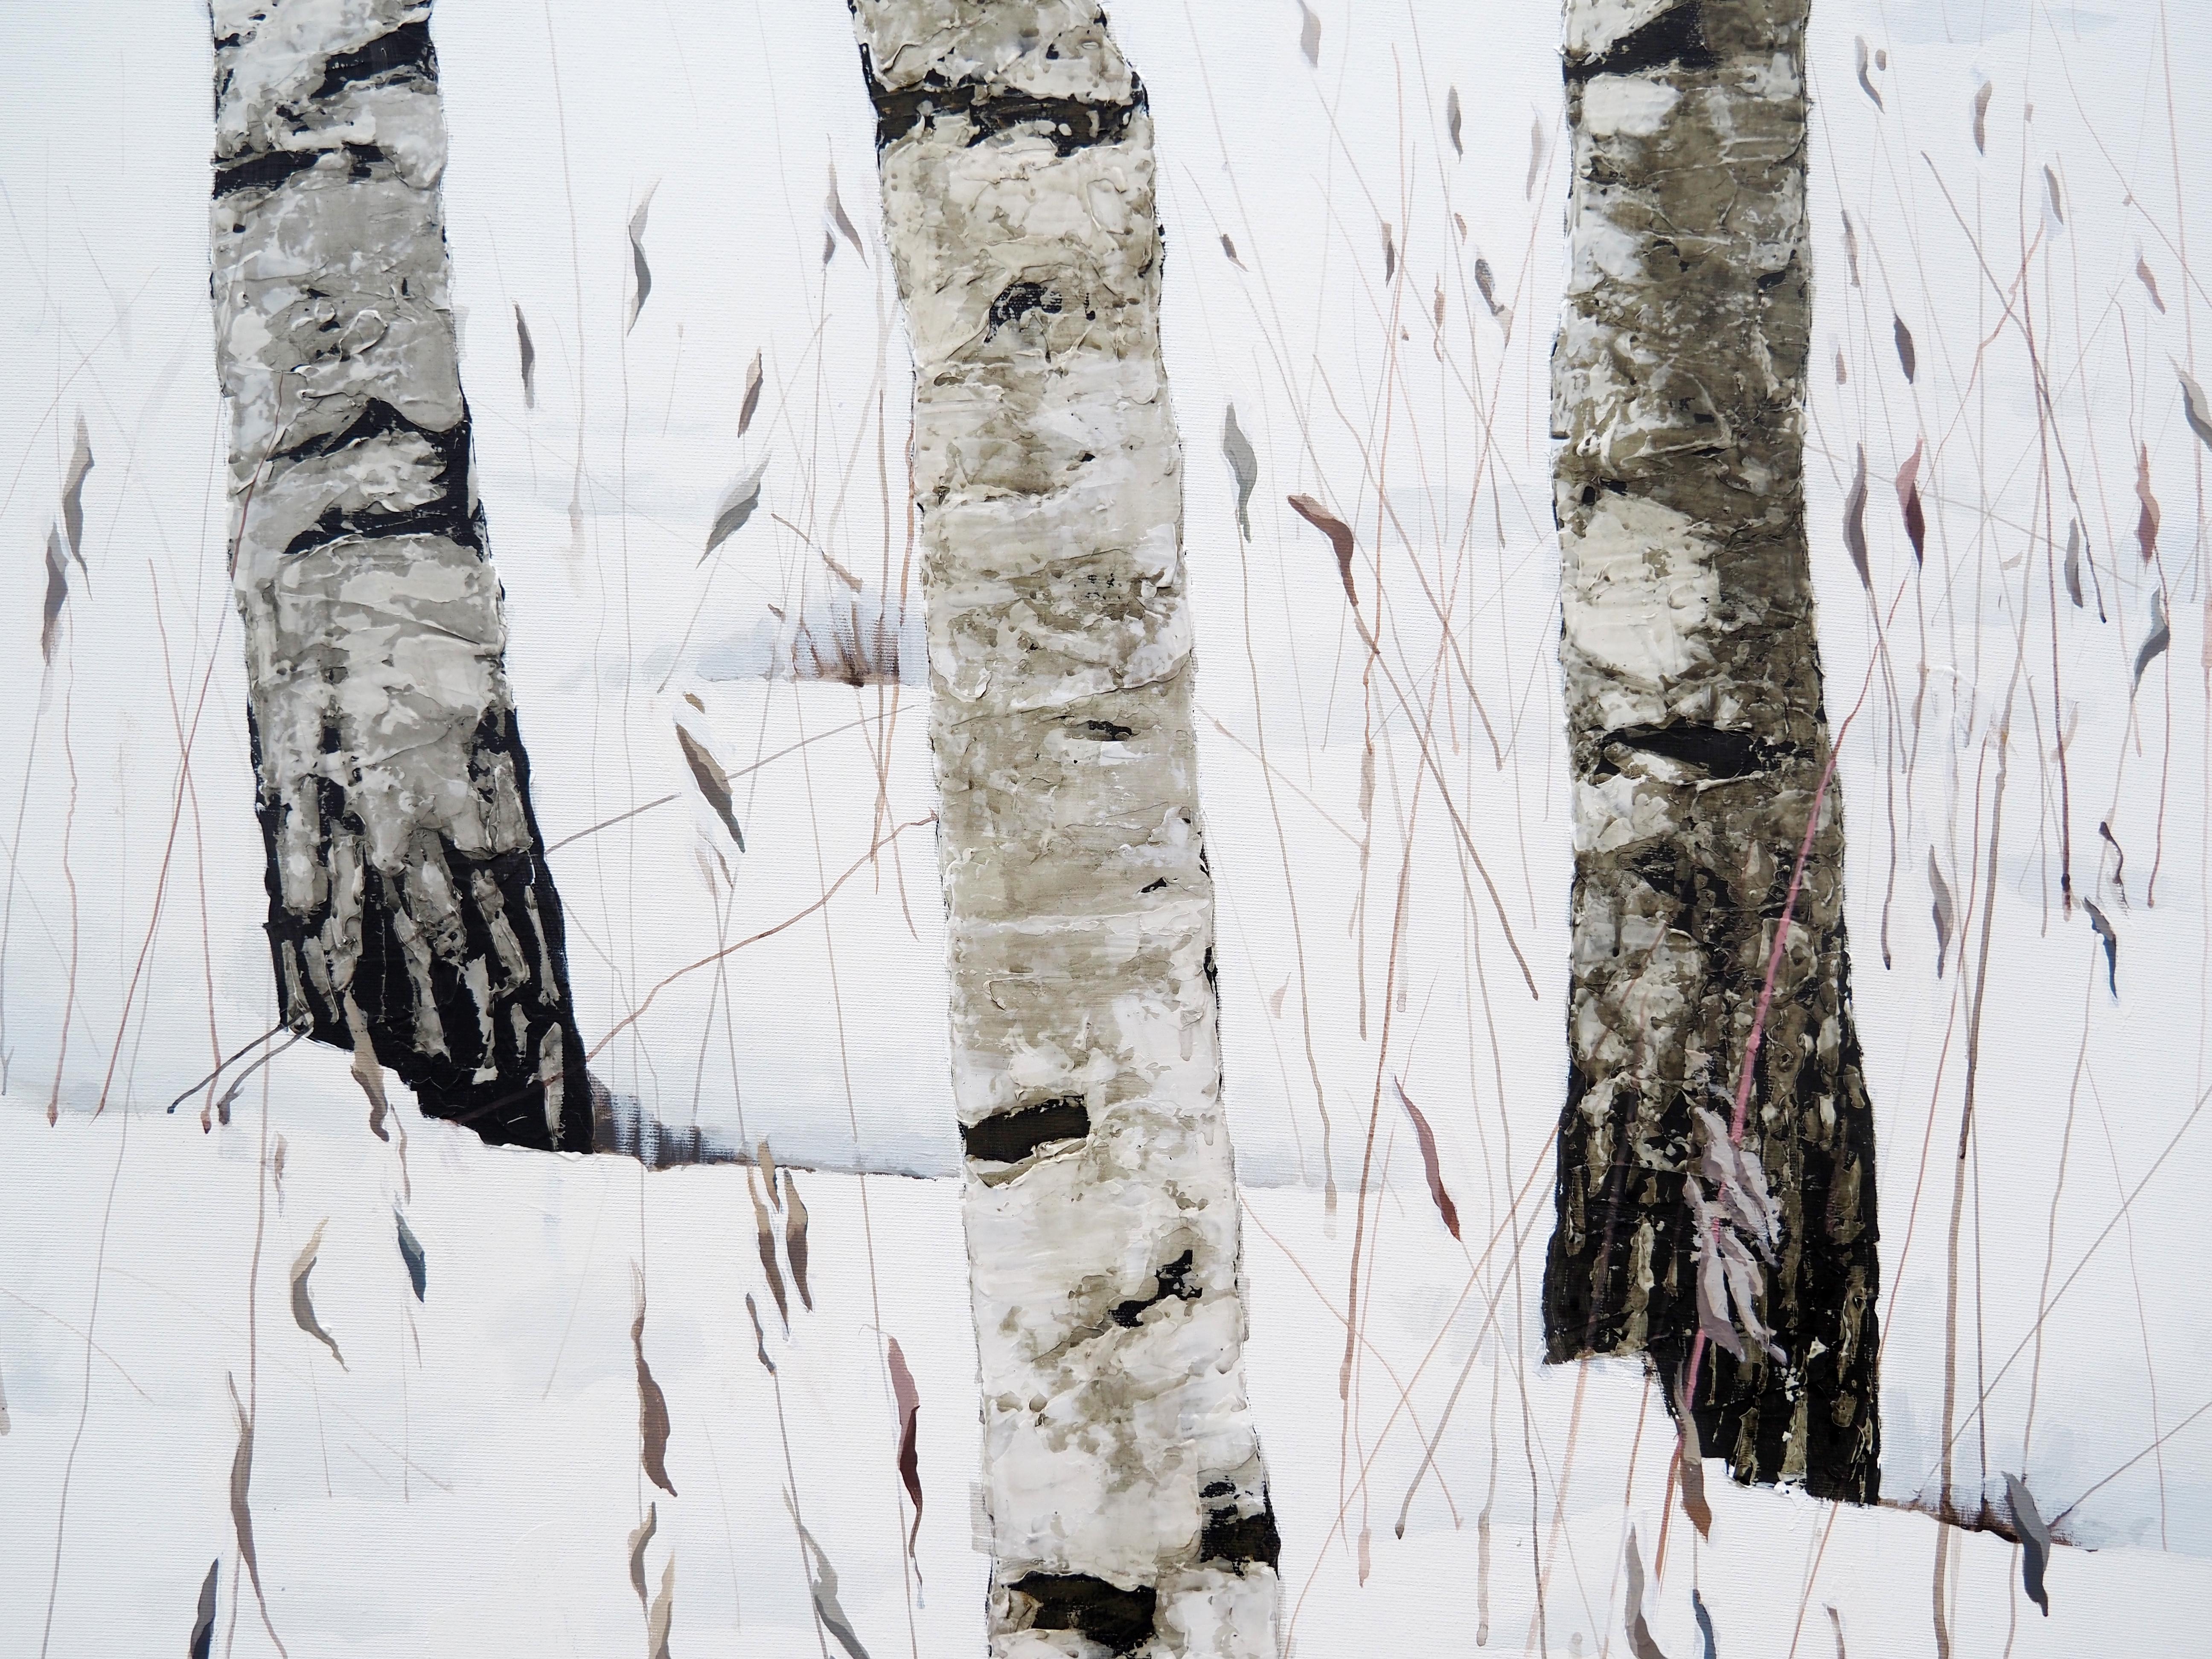 It is possible to purchase the entire tryptych. Please see my other items and offers.

Birches IV, Part 2, acrylic, modeling paste on canvas

Please ask me about shipping costs because the system of 1stdibs calculates the total size of the